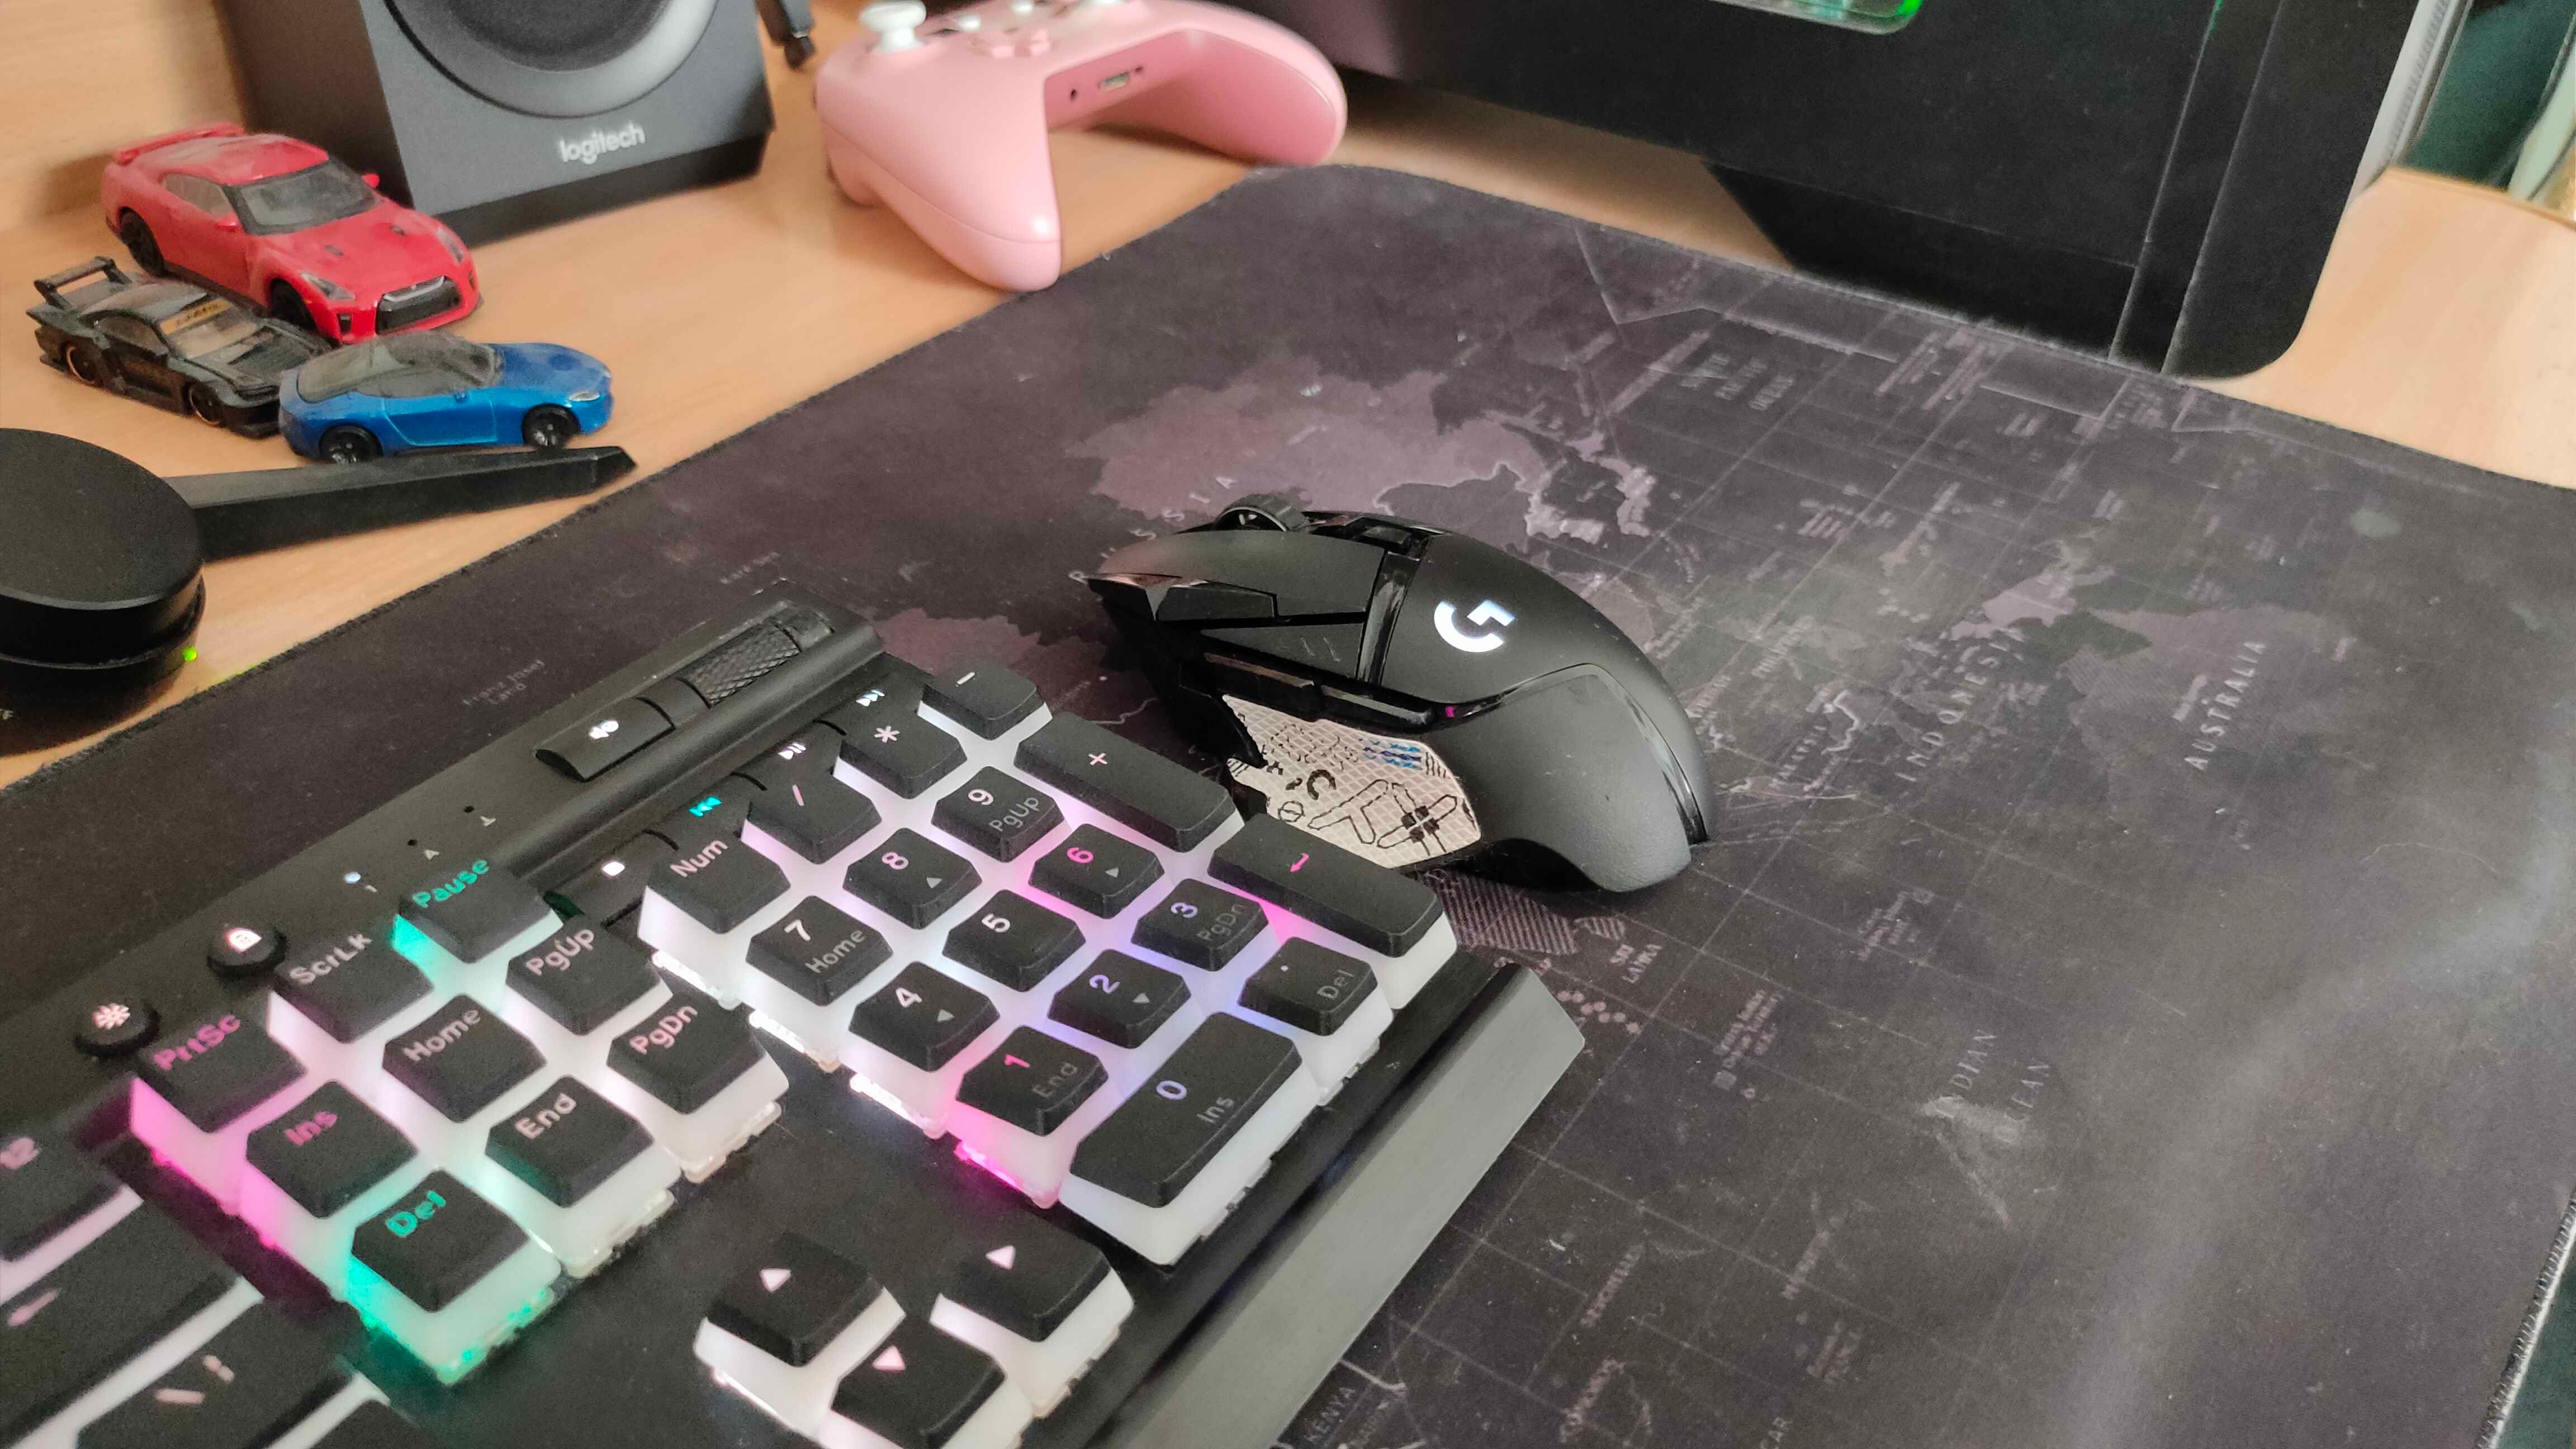 Image of Keyboard and Mouse of a Deskpad.